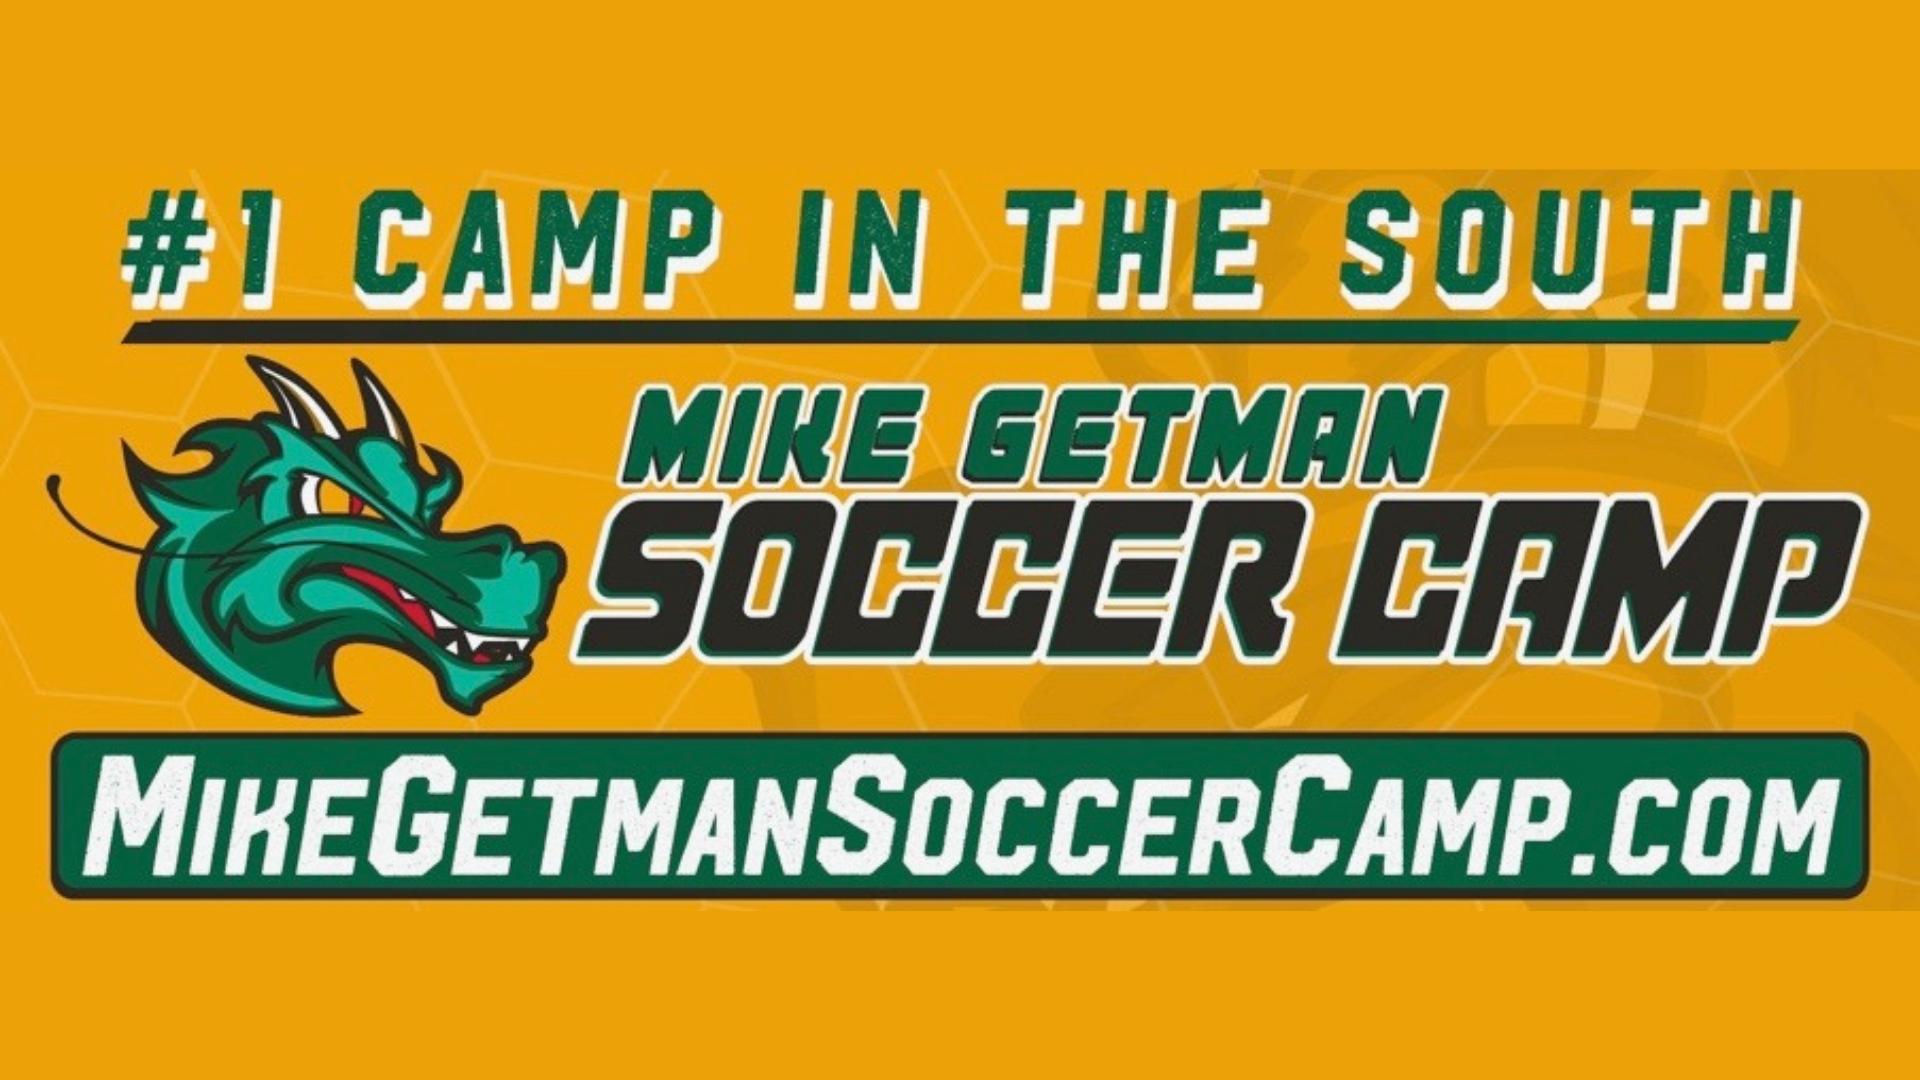 Mike Getman Soccer Camps Yellow